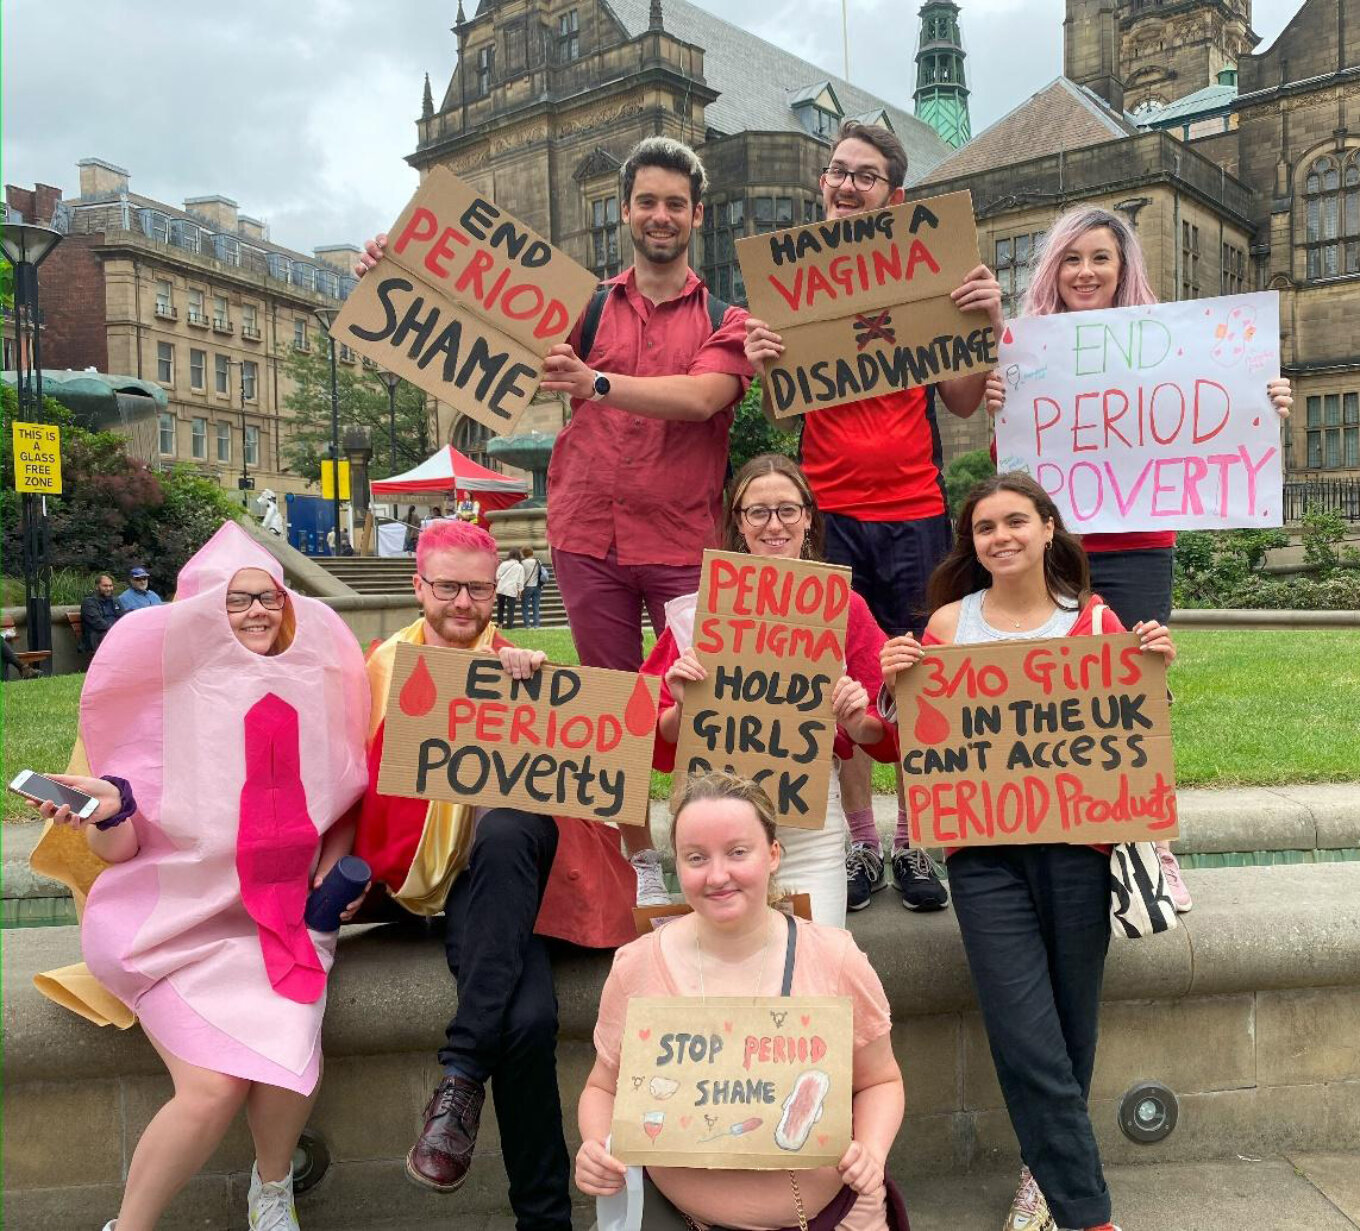 A group of young people in the Peace Gardens in Sheffield hold up handmade signs saying things like End Period Poverty and Period Stigma Holds Girls Back.